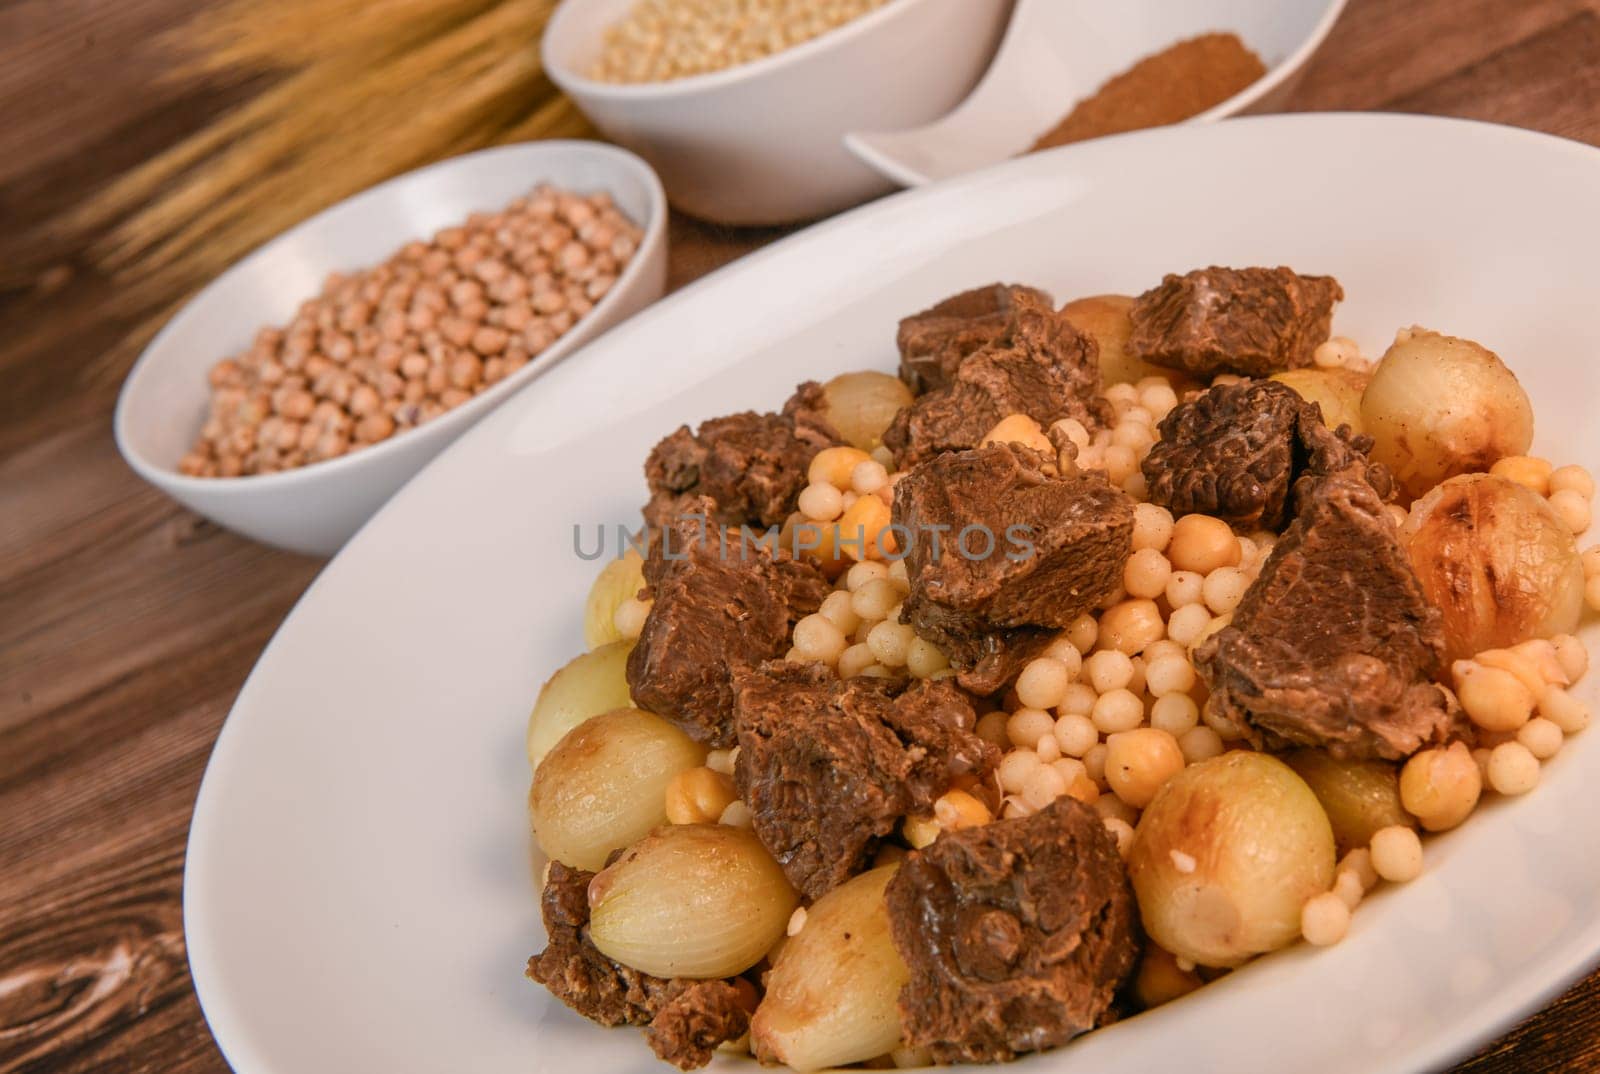 Moughrabieh is a popular dish in the Lebanese cuisine, LEBANESE RECIPE FOR MOUGHRABIEH WITH BEEF AND SMALL ONIONS, SEMOLINA PEARLS AND CHICKPEAS. High quality photo